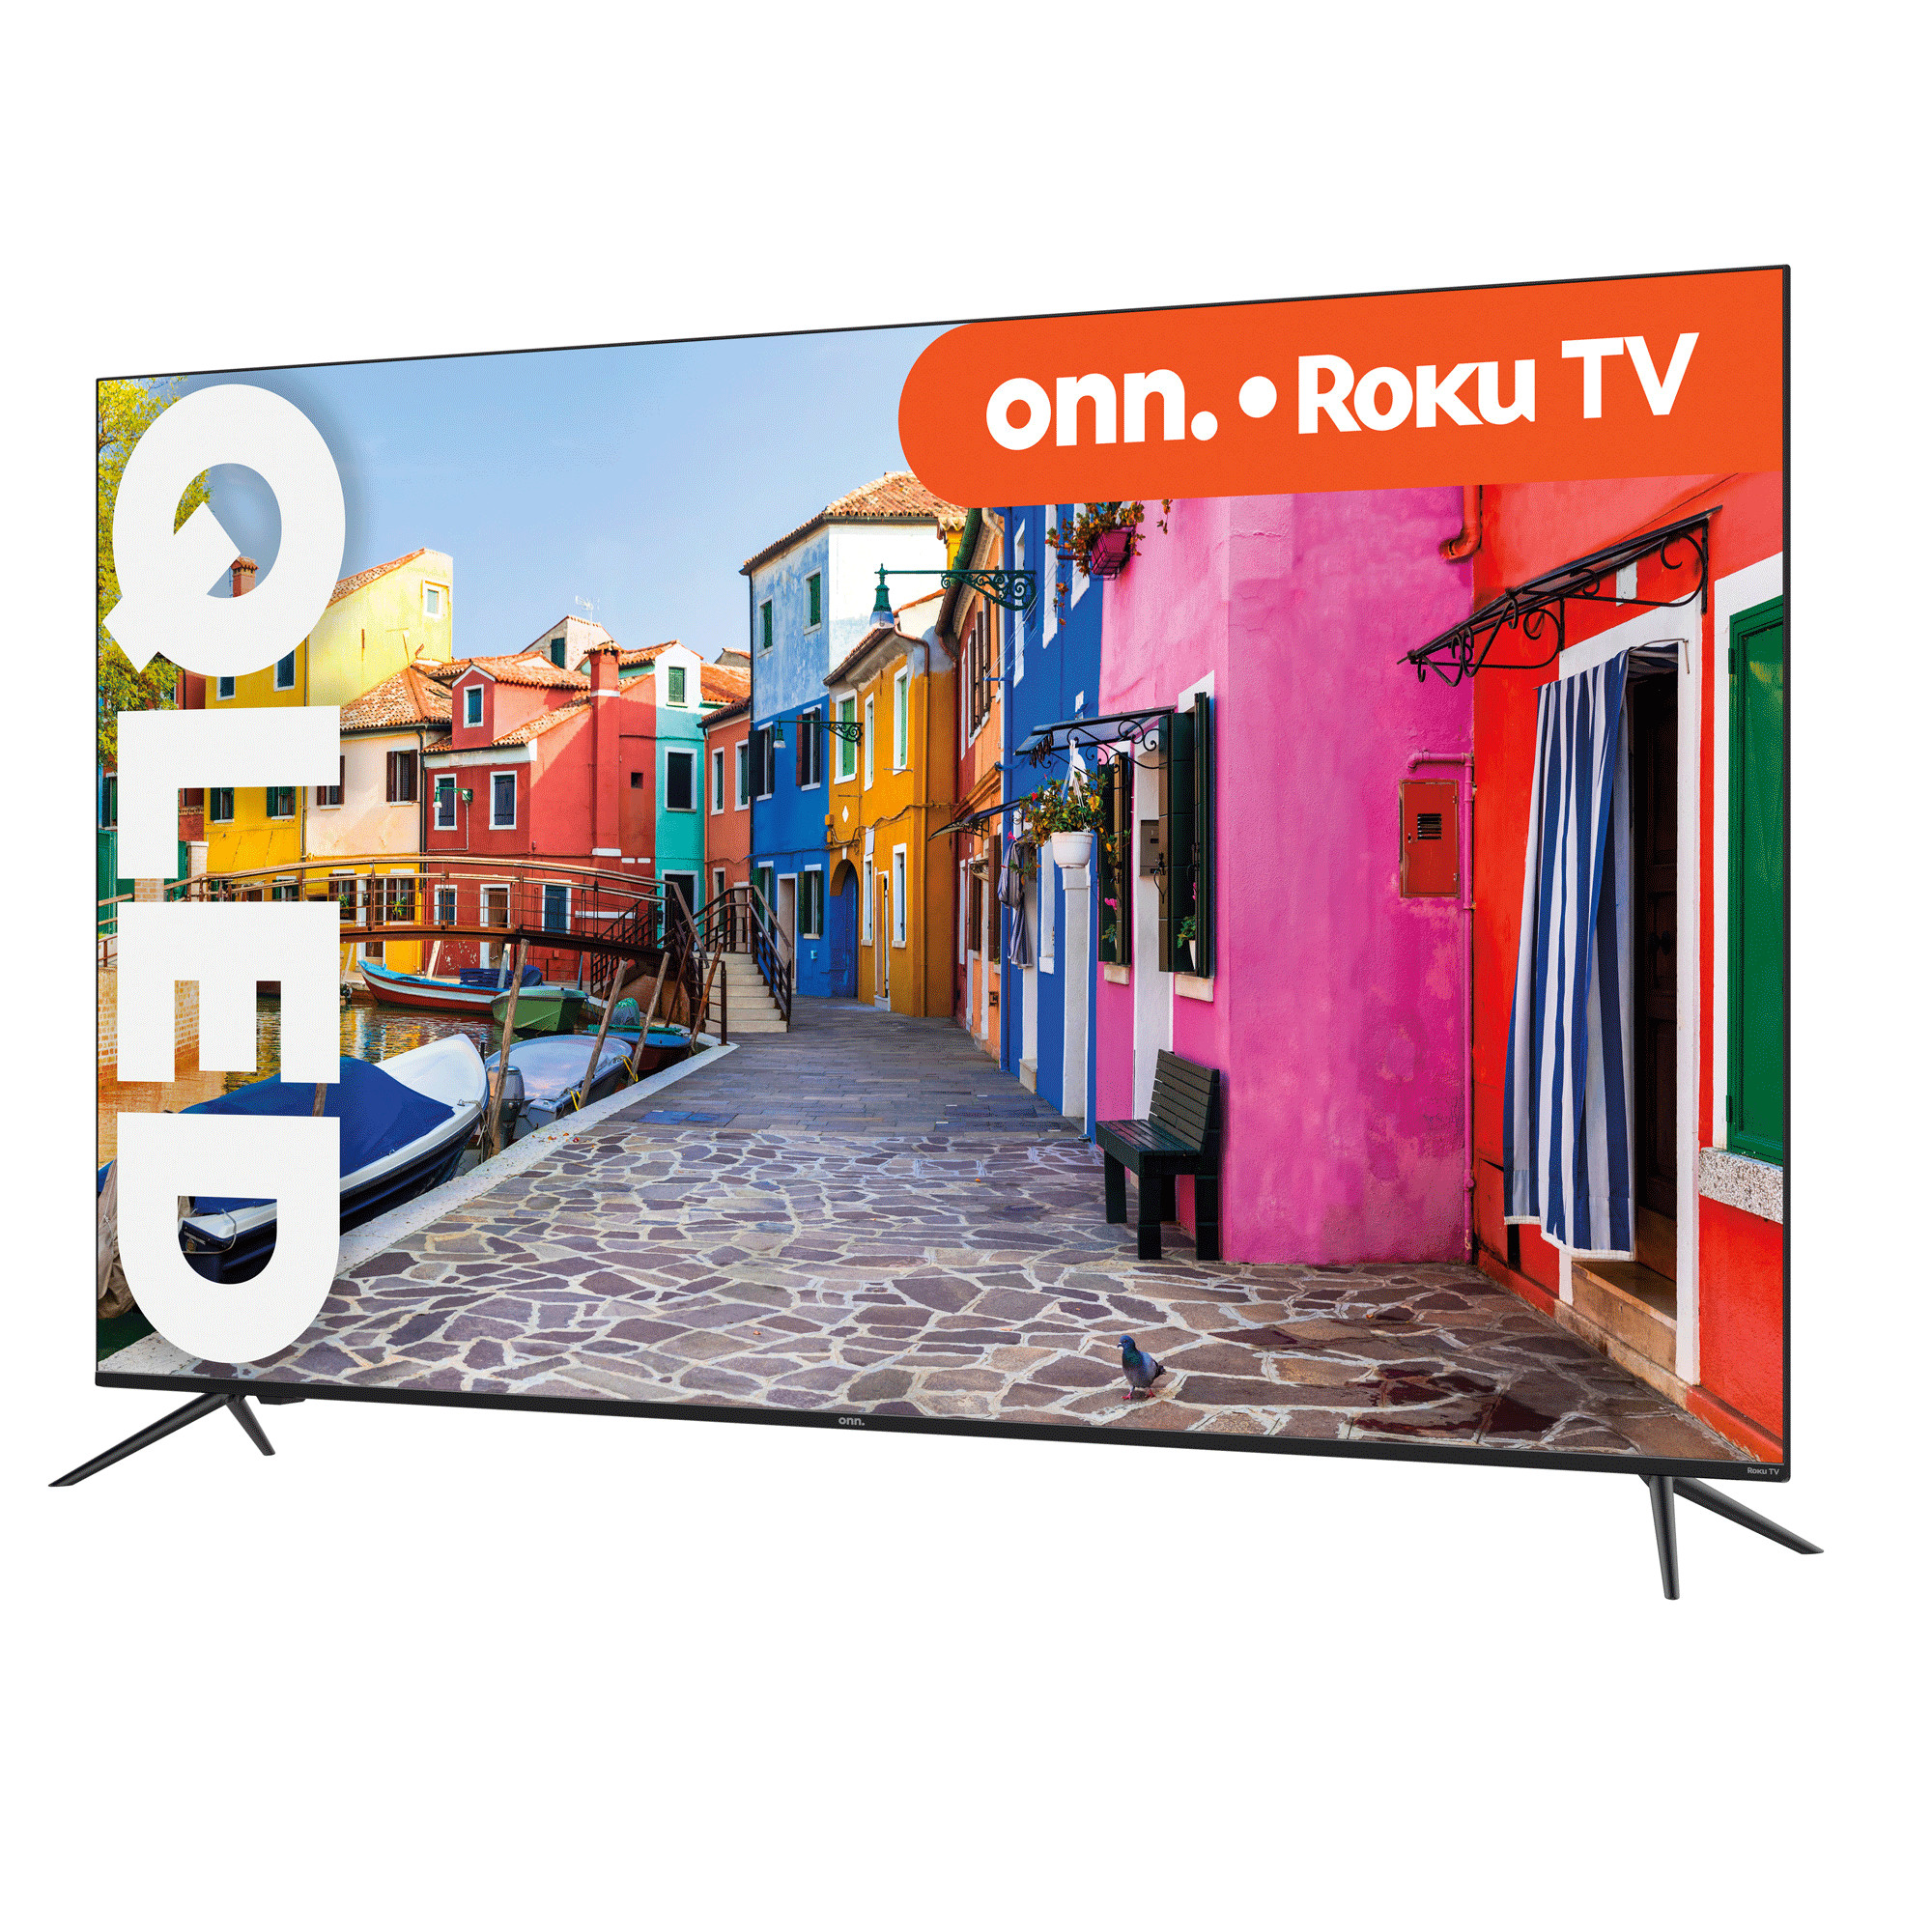 onn. 65” QLED 4K UHD (2160p) Roku Smart TV with Dolby Atmos, Dolby Vision, Local Dimming, 120hz Effective Refresh Rate, and HDR (100071705) - image 3 of 17